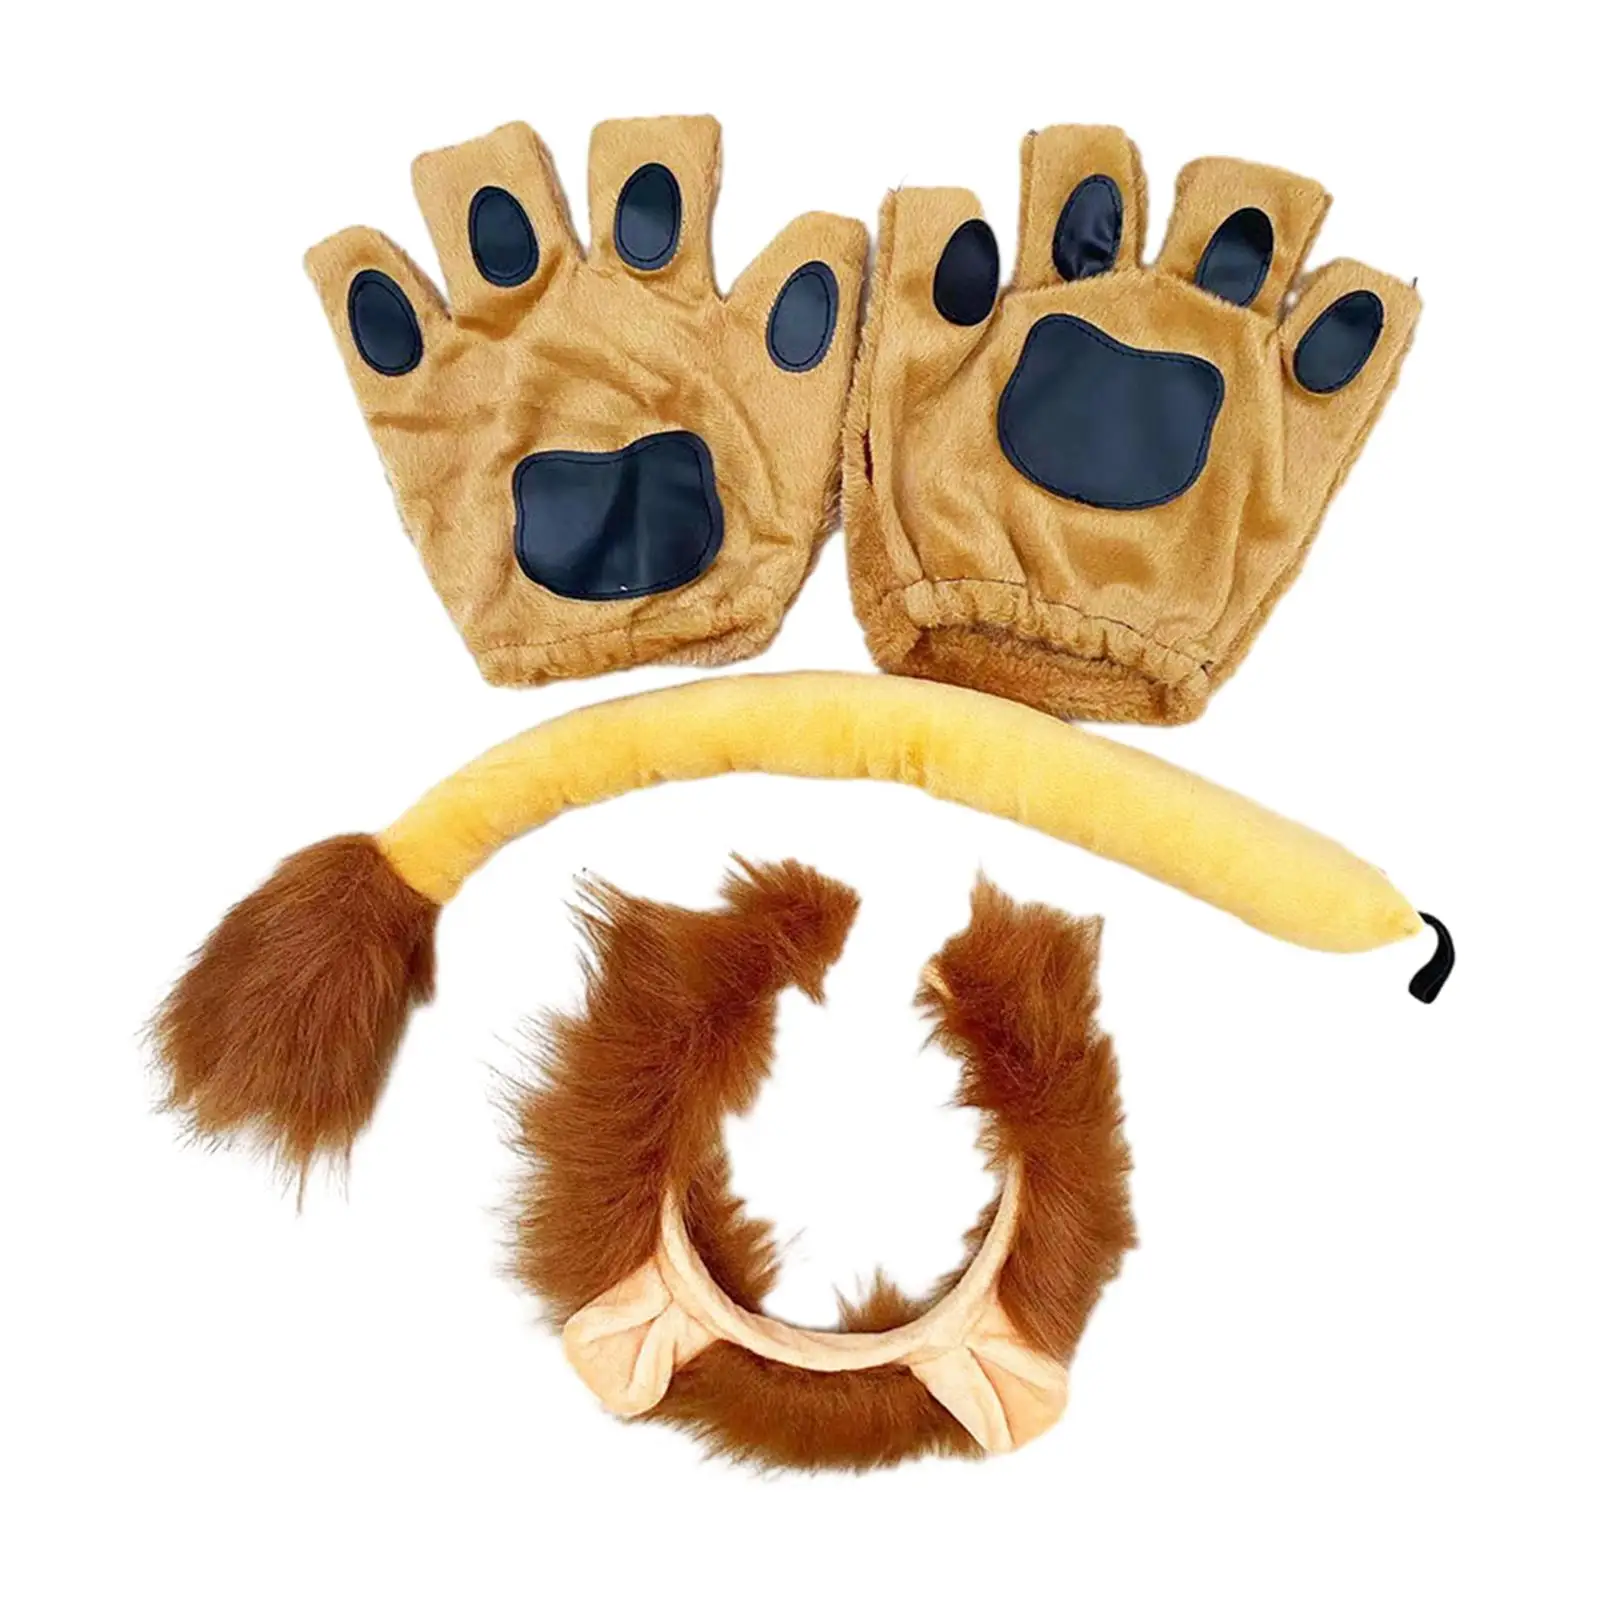 Lion Ears and Tail with Gloves for Kids Headwear Plush Lion Ears Hair Clip for Festival Performance Party Birthday Fancy Dress